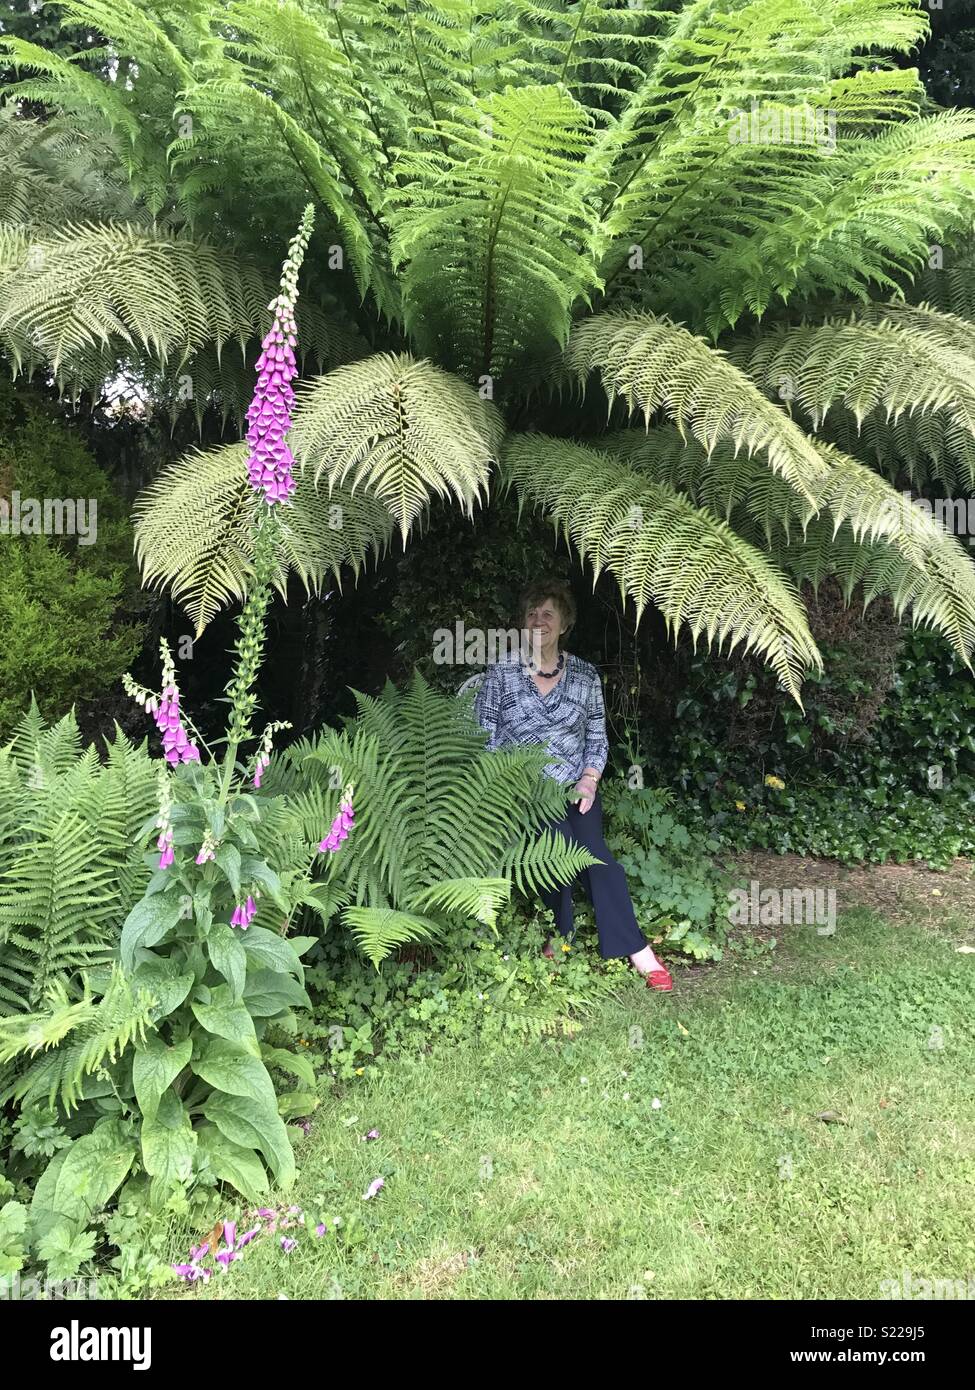 Lady woman sitting under palm tree in English country garden with flowers framing the scene in East Sussex rotherfield garden Stock Photo